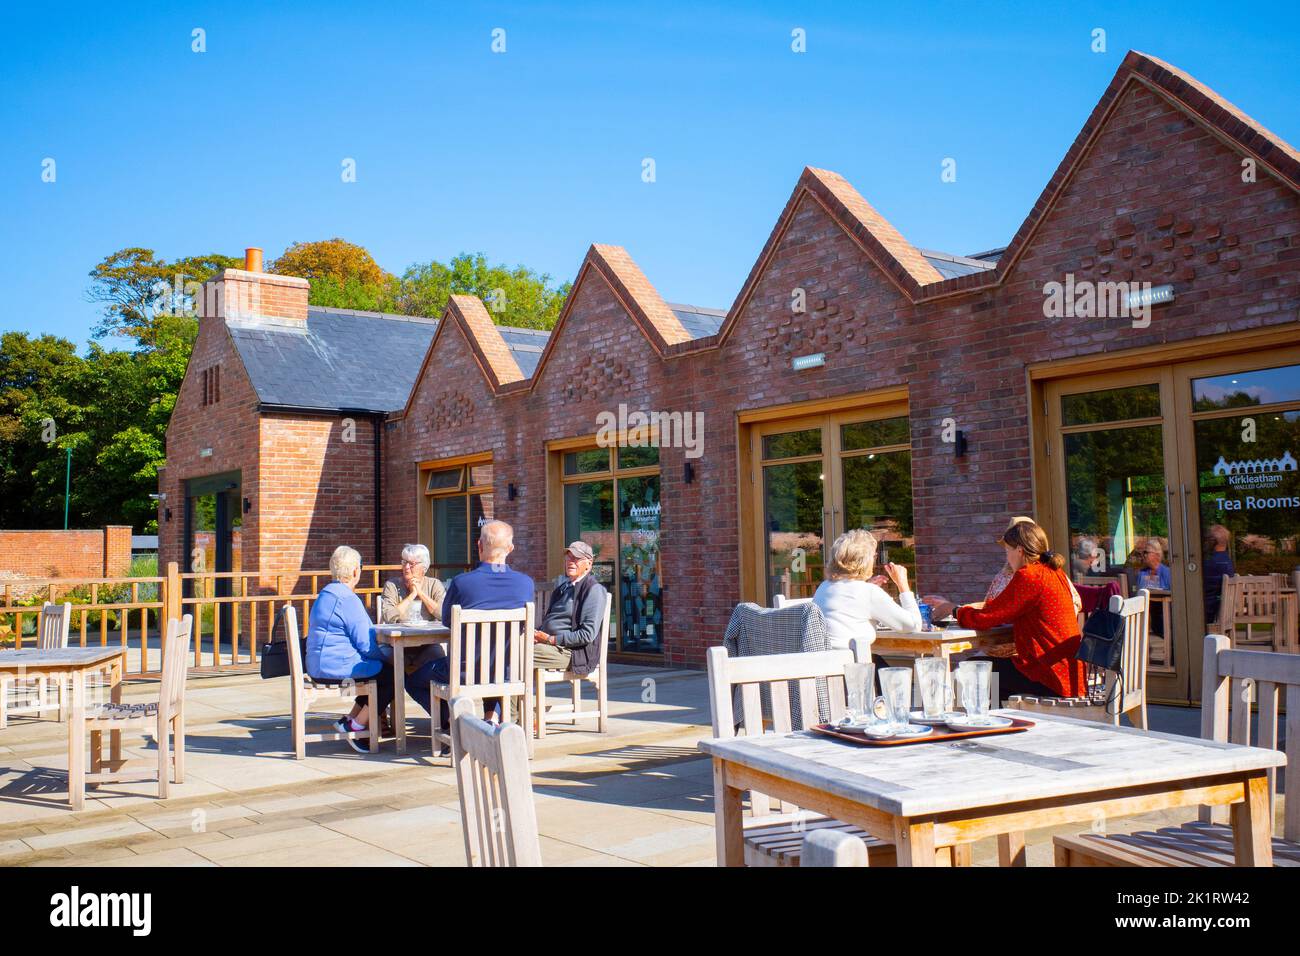 Exterior of the Tea rooms at the Kirkleatham Walled Garden visitor attraction with people at tables outside on a sunny autumn day Stock Photo